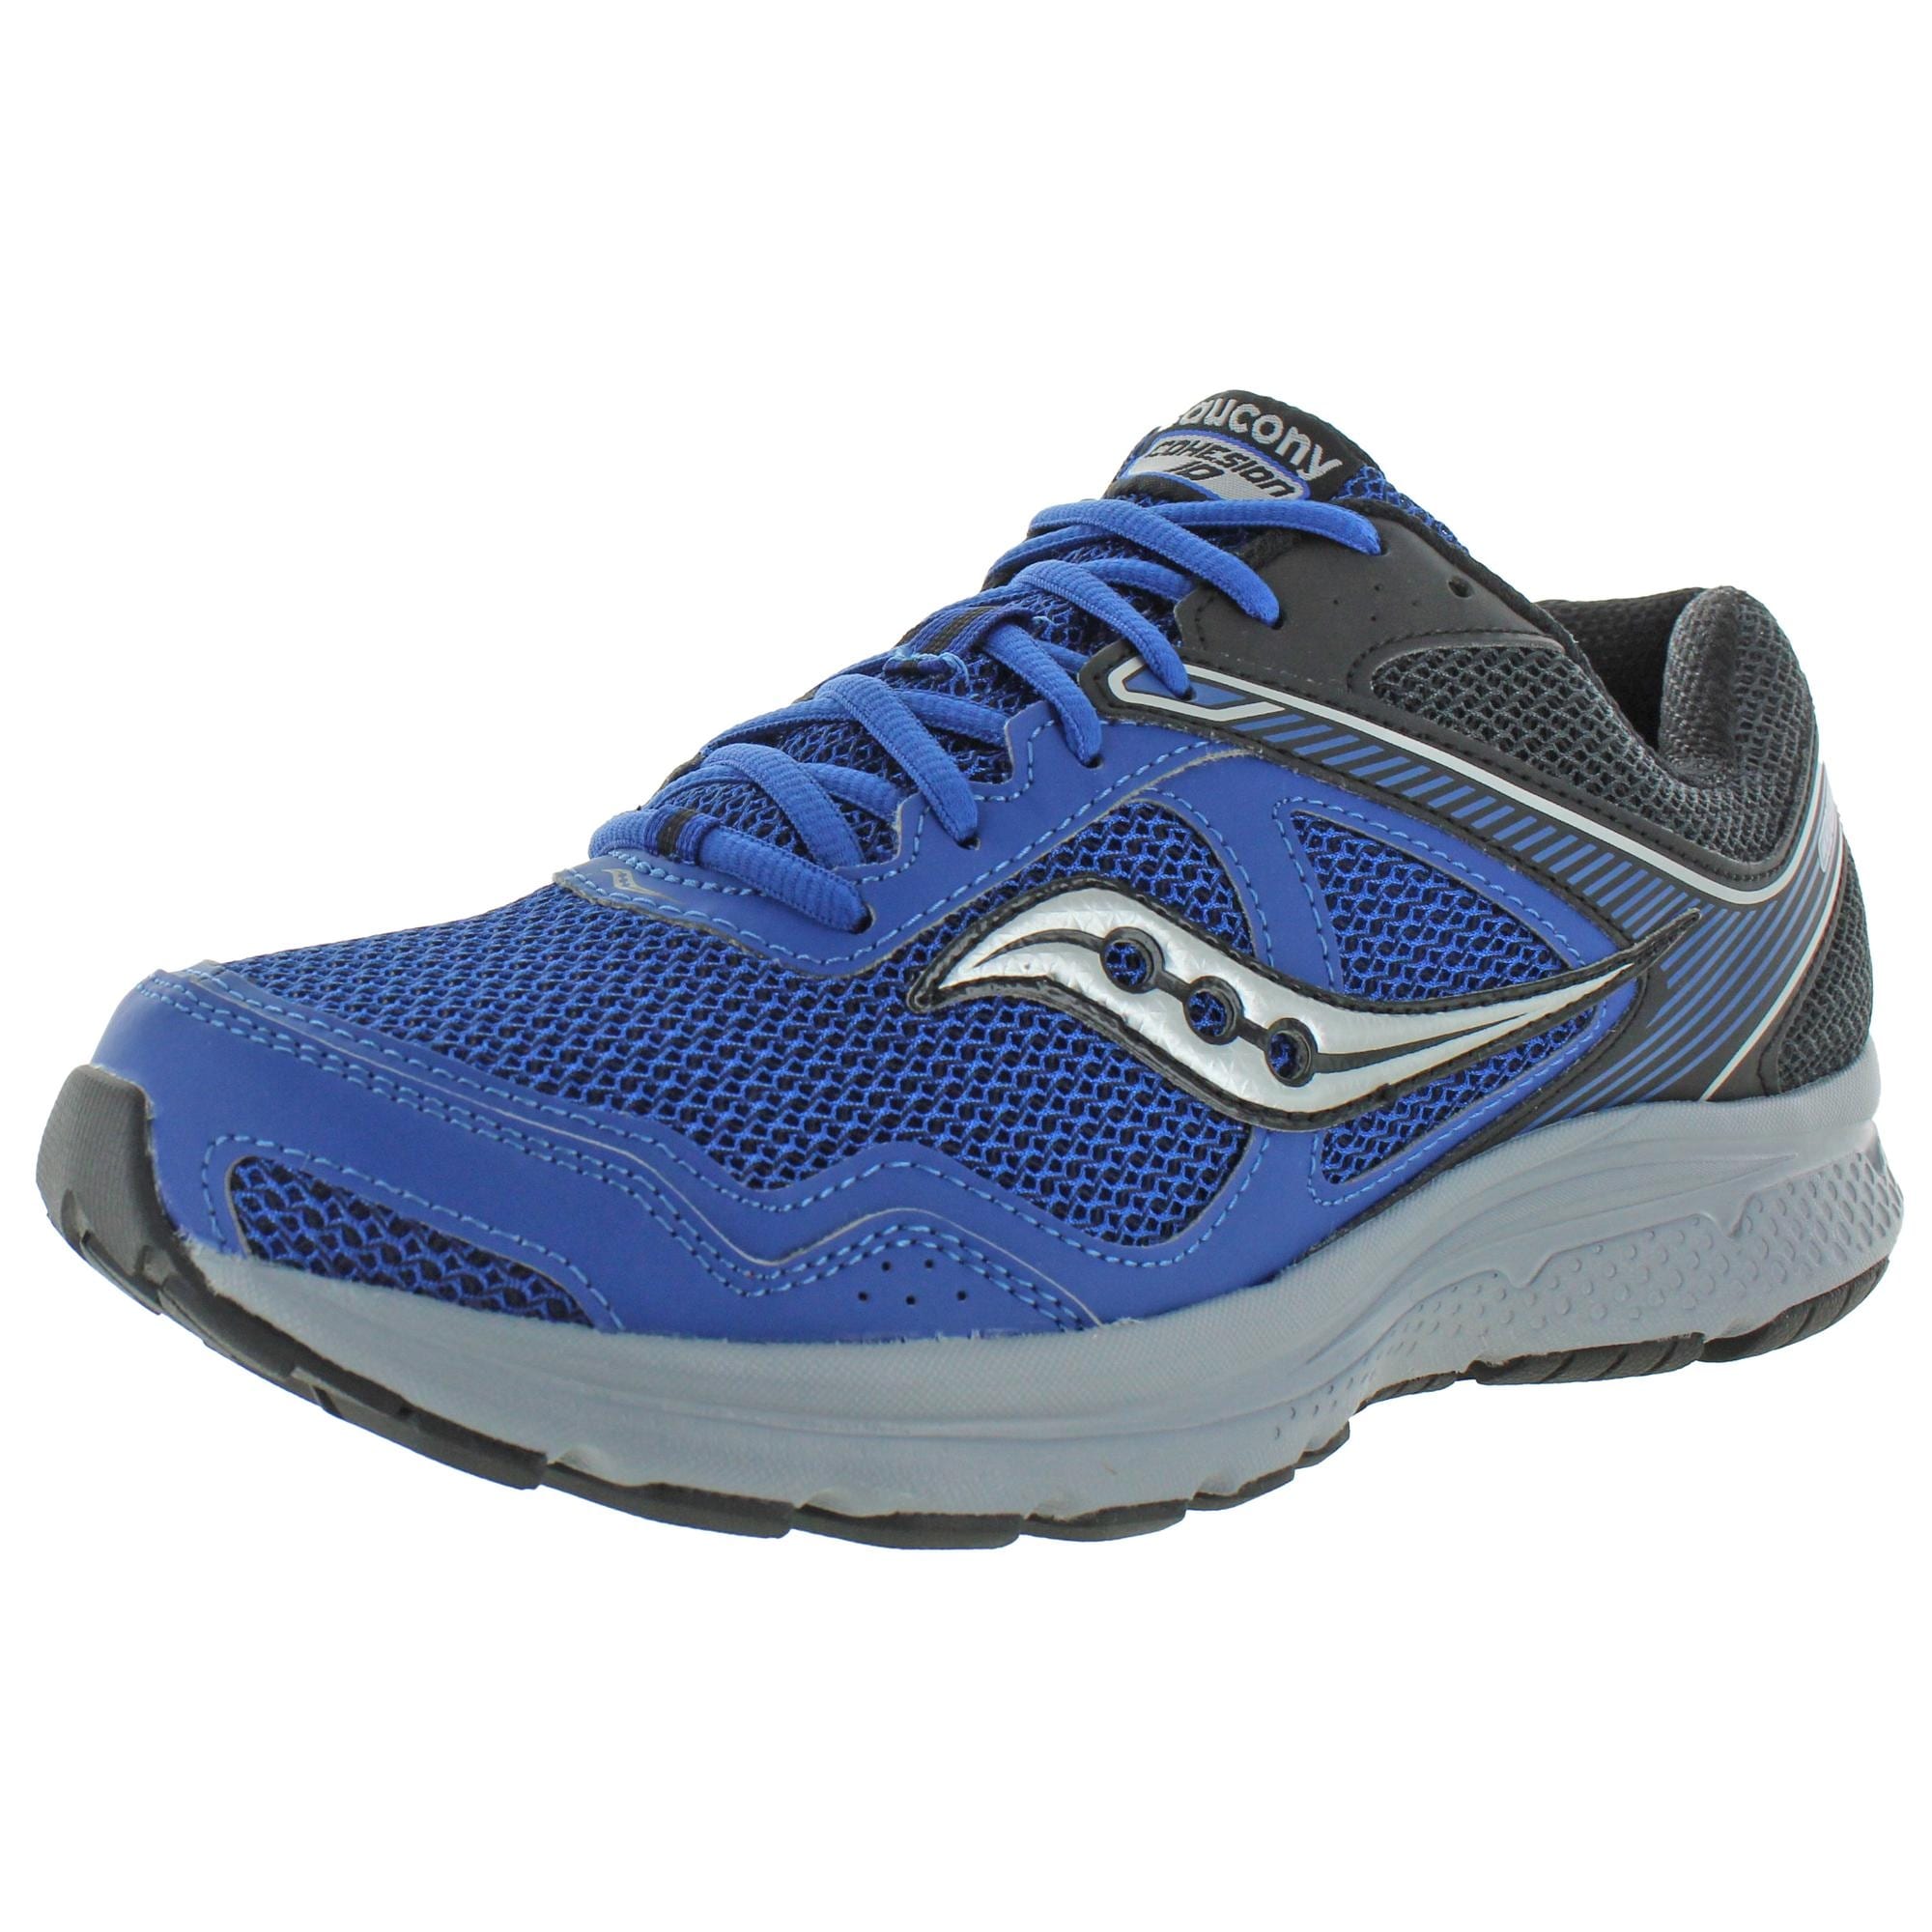 Grid Cohesion 10 Running Shoes Trainers 